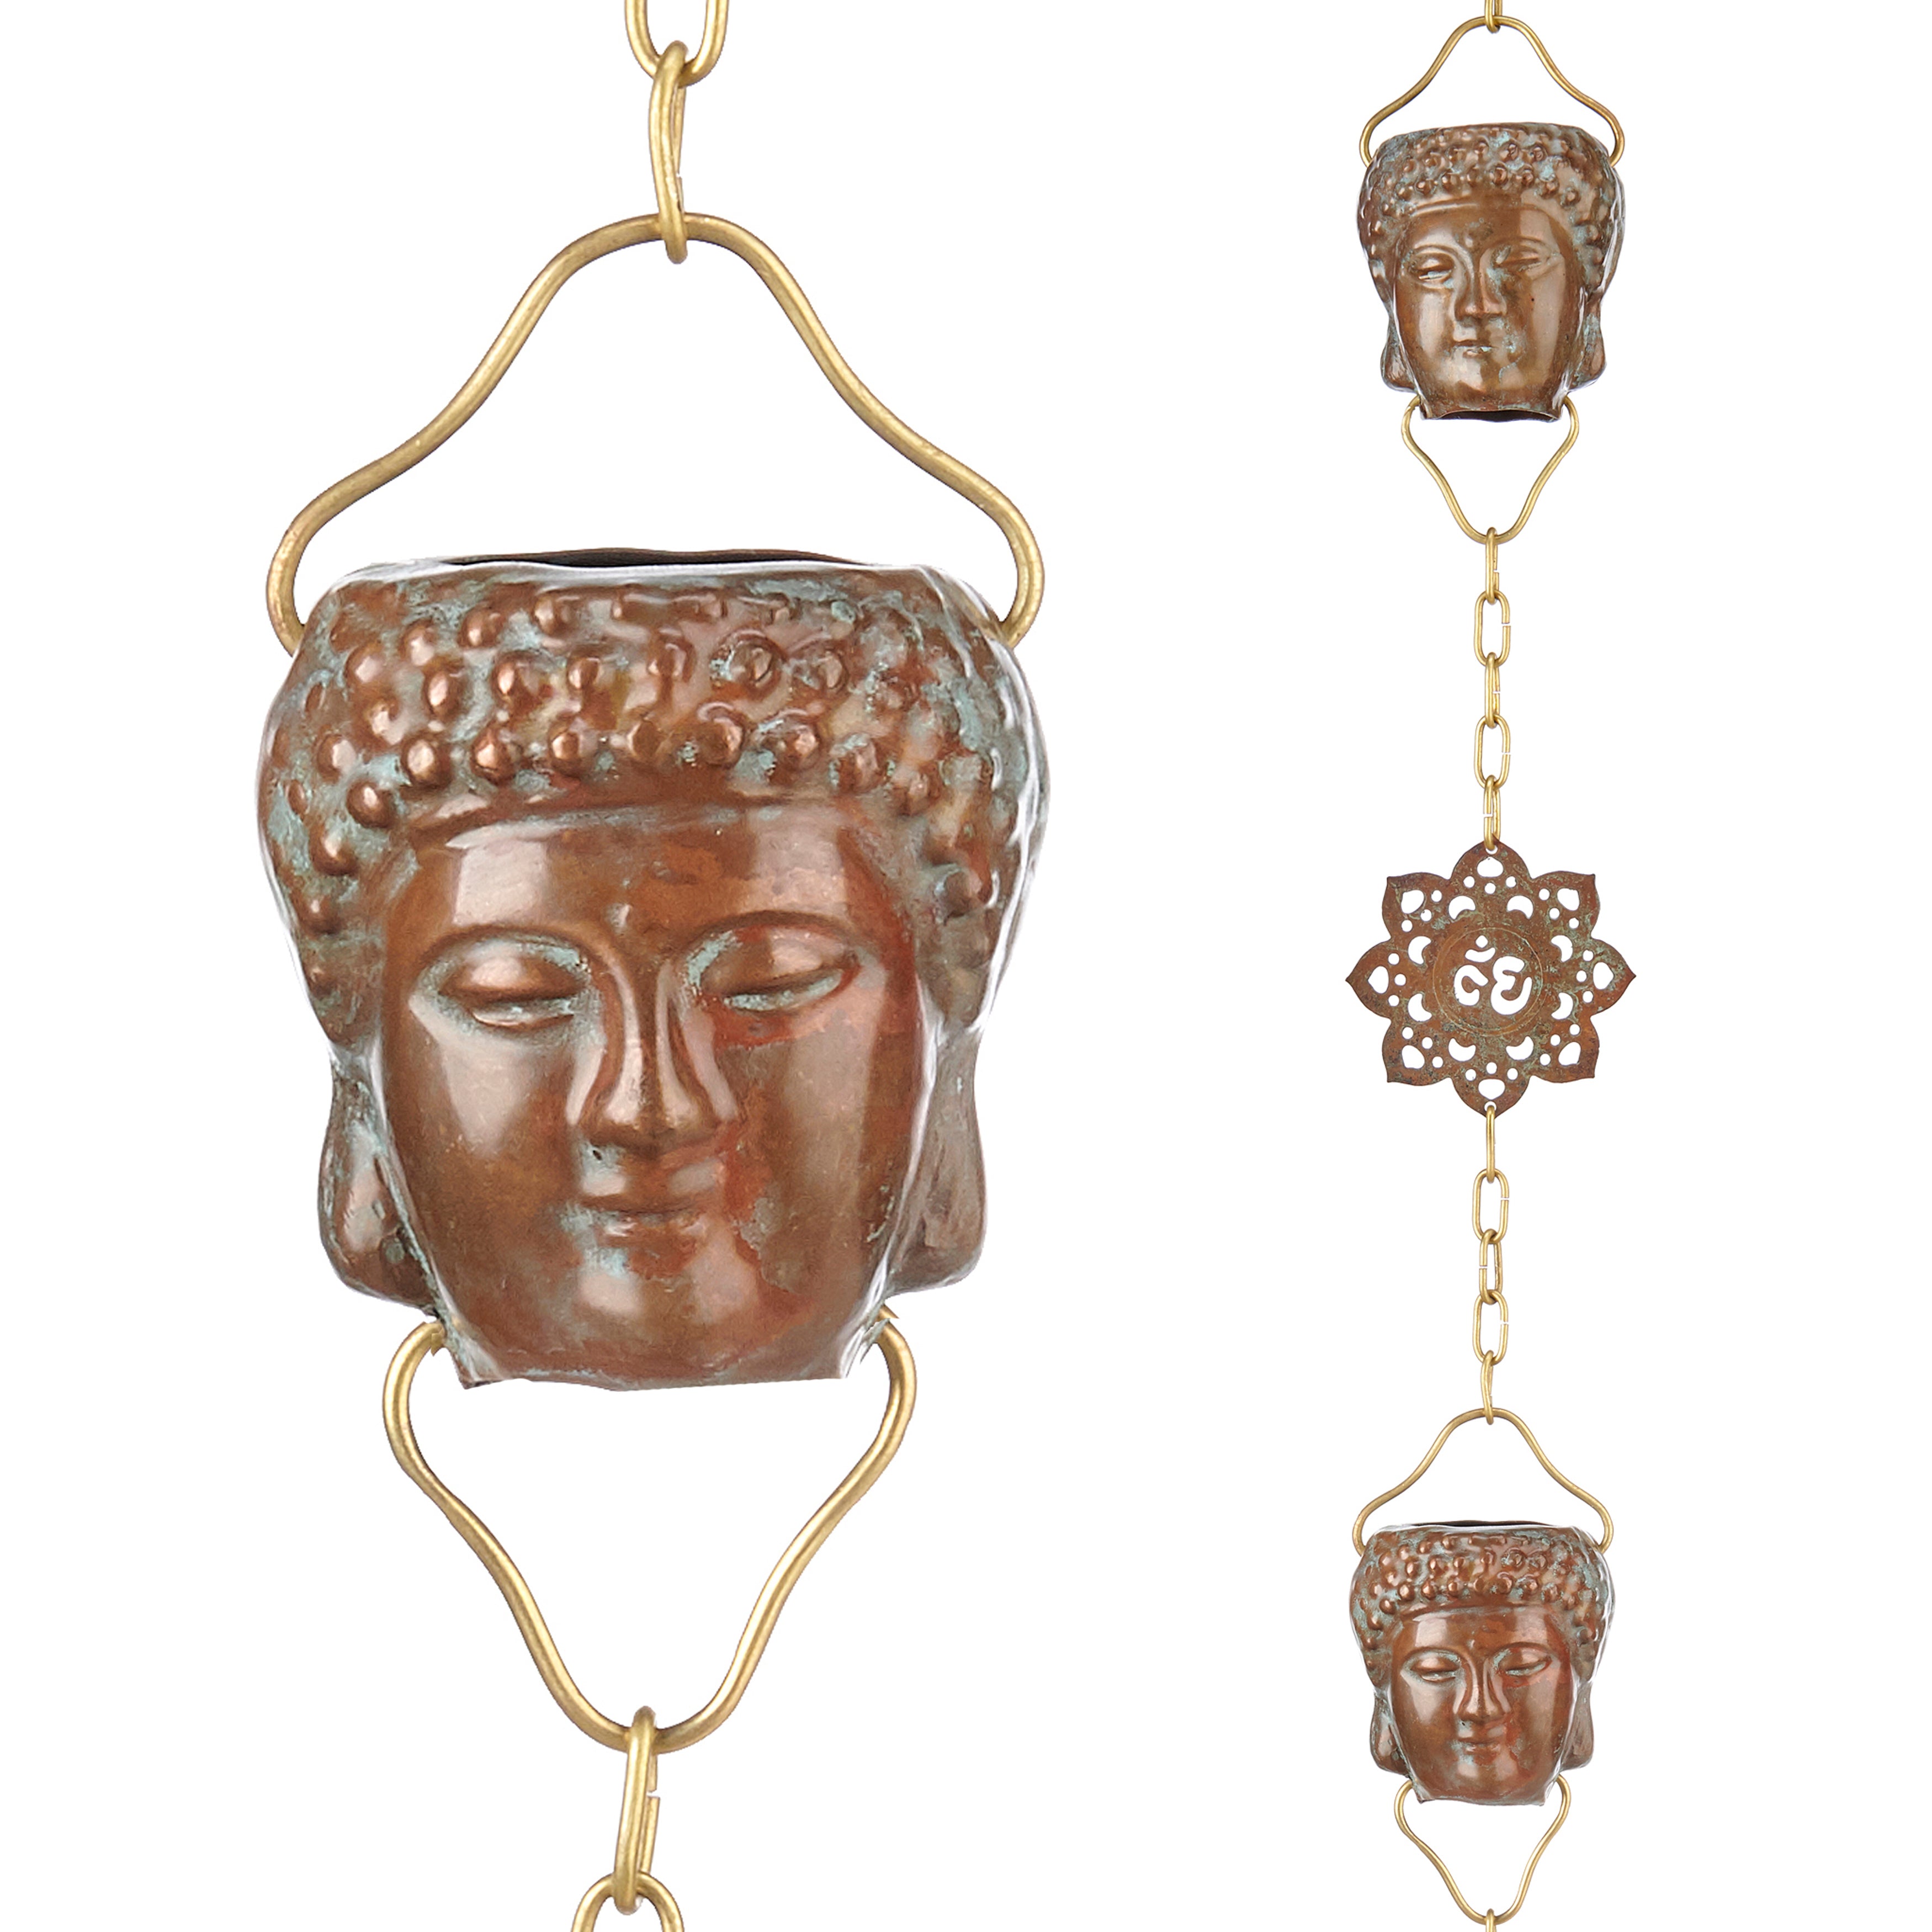 Antiqued Buddha Head Rain Chain - 8.5 ft., with 12 Large Figures